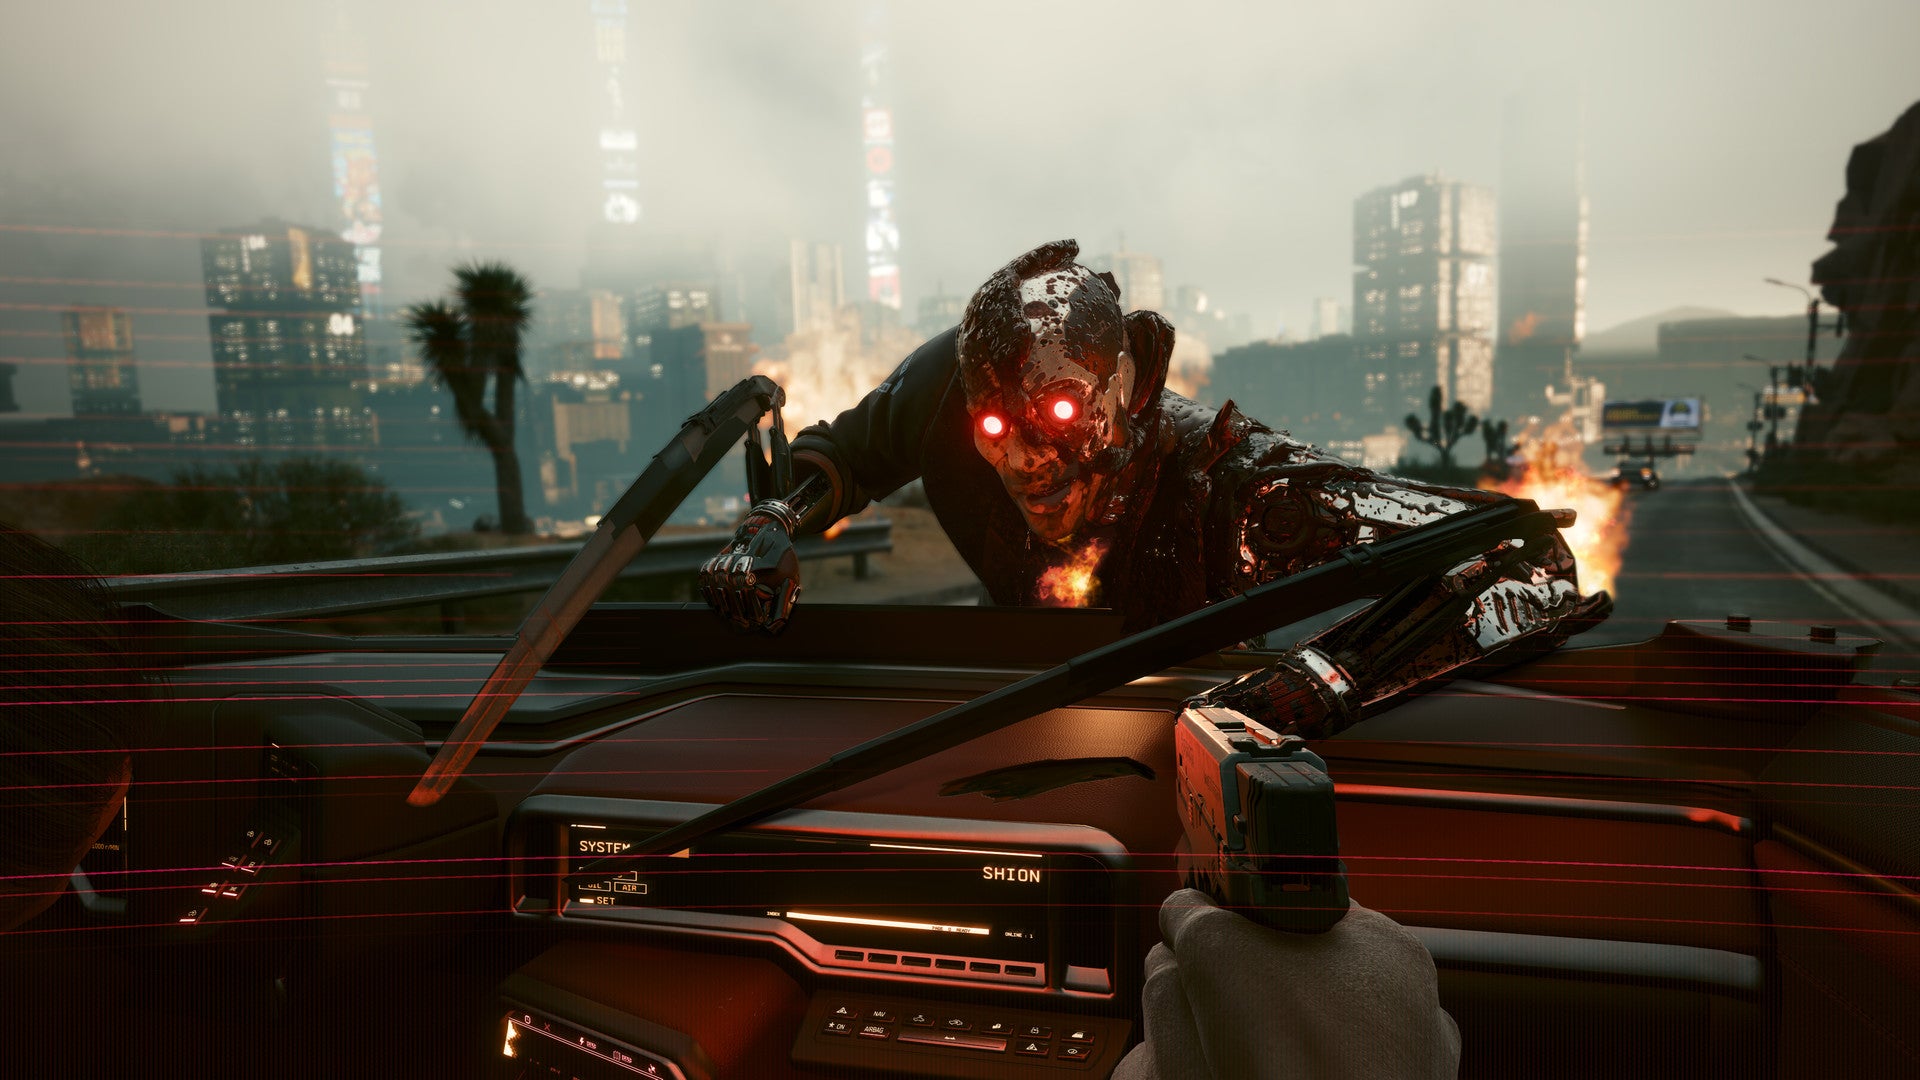 A red-eyed cyborg with machete arms climbs through the windshield of a car in Cyberpunk 2077.